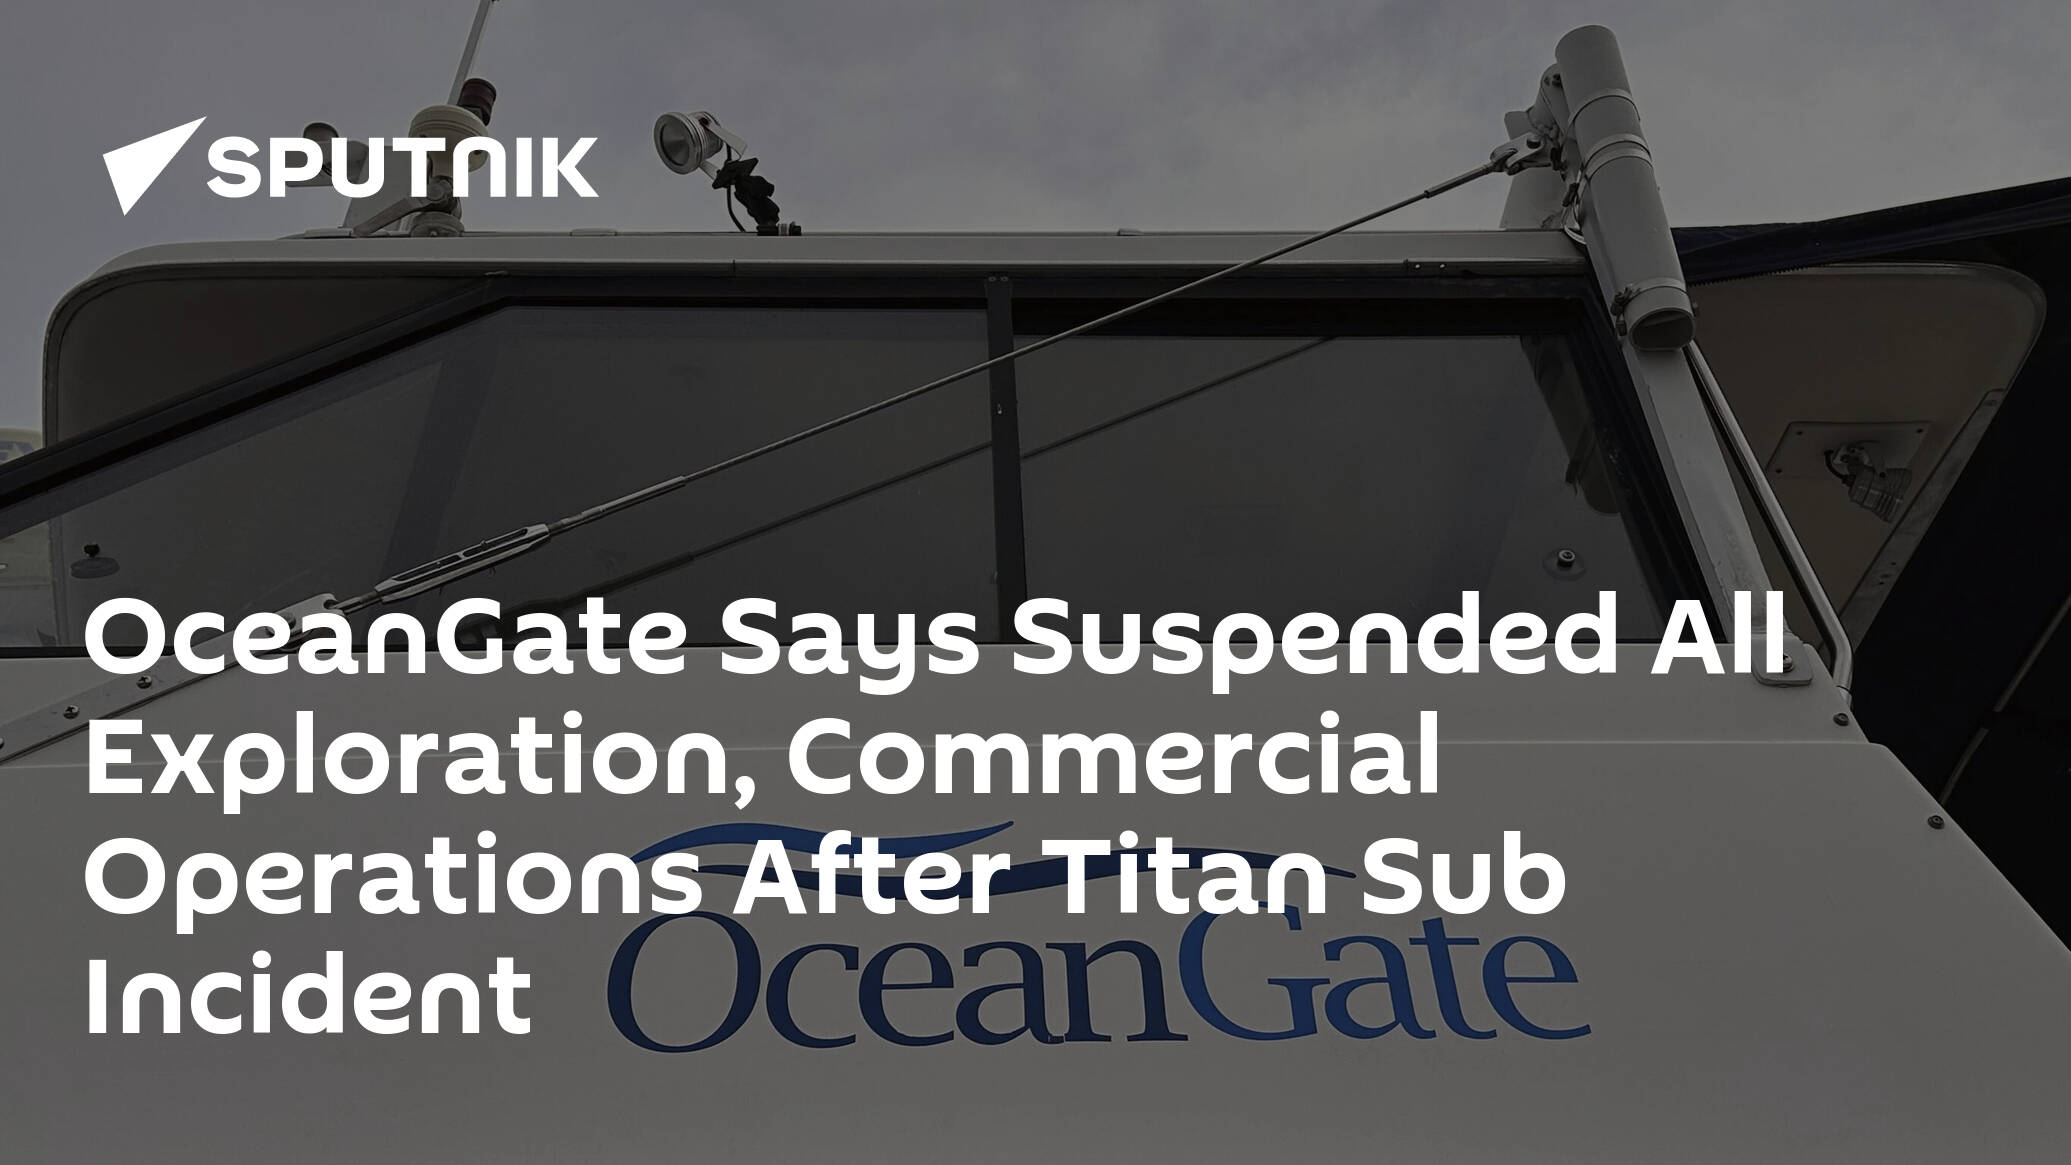 OceanGate Says Suspended All Exploration, Commercial Operations After Titan Sub Incident